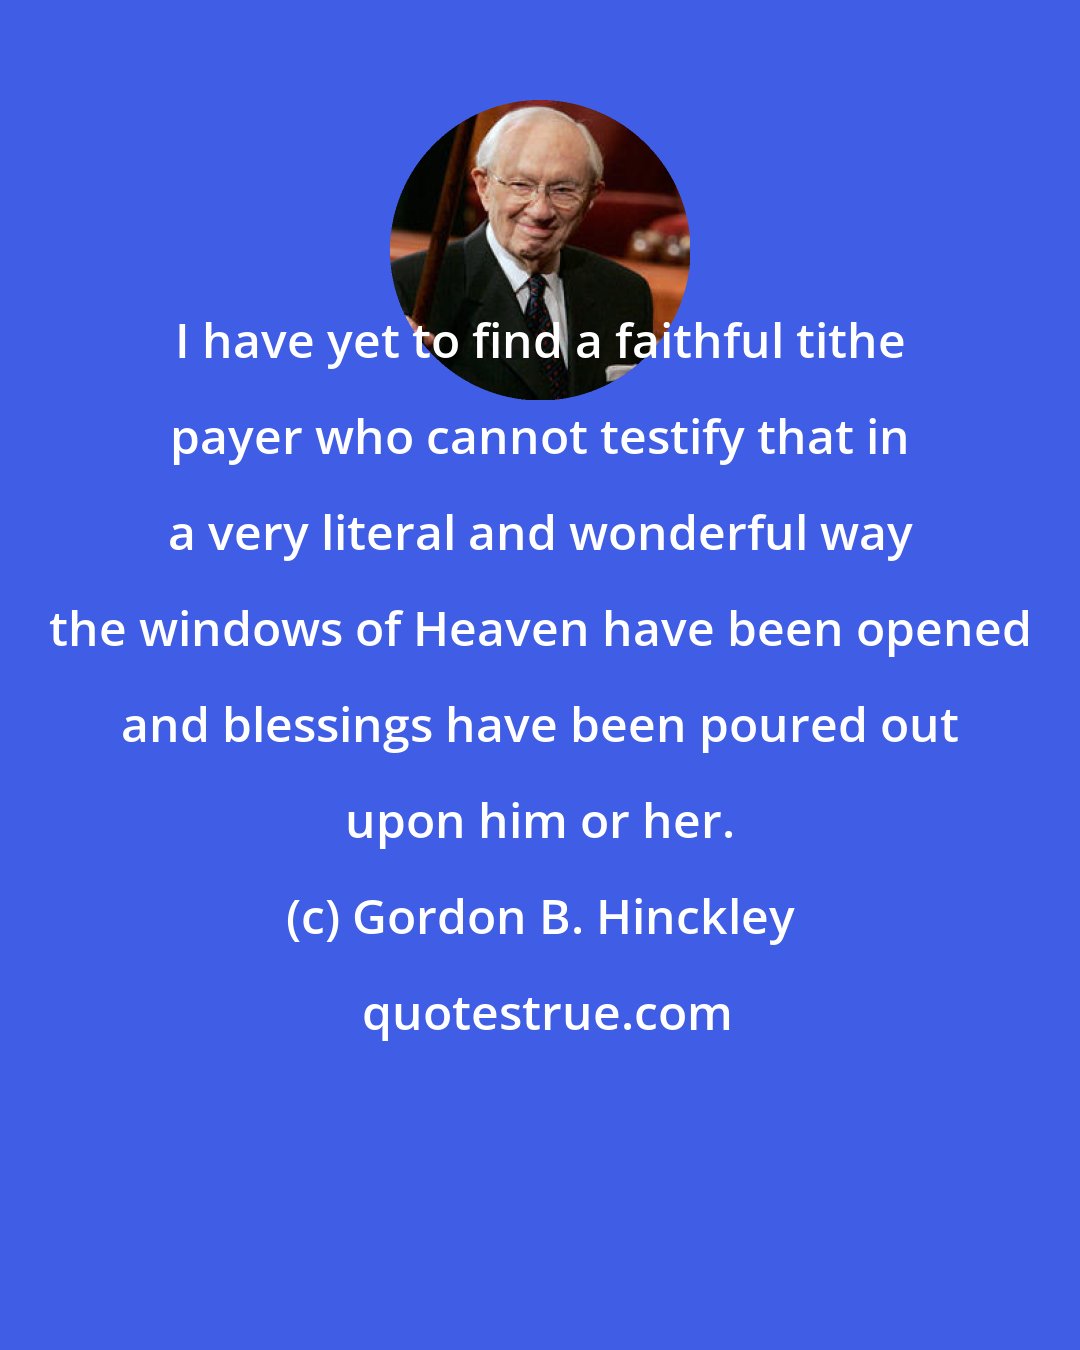 Gordon B. Hinckley: I have yet to find a faithful tithe payer who cannot testify that in a very literal and wonderful way the windows of Heaven have been opened and blessings have been poured out upon him or her.